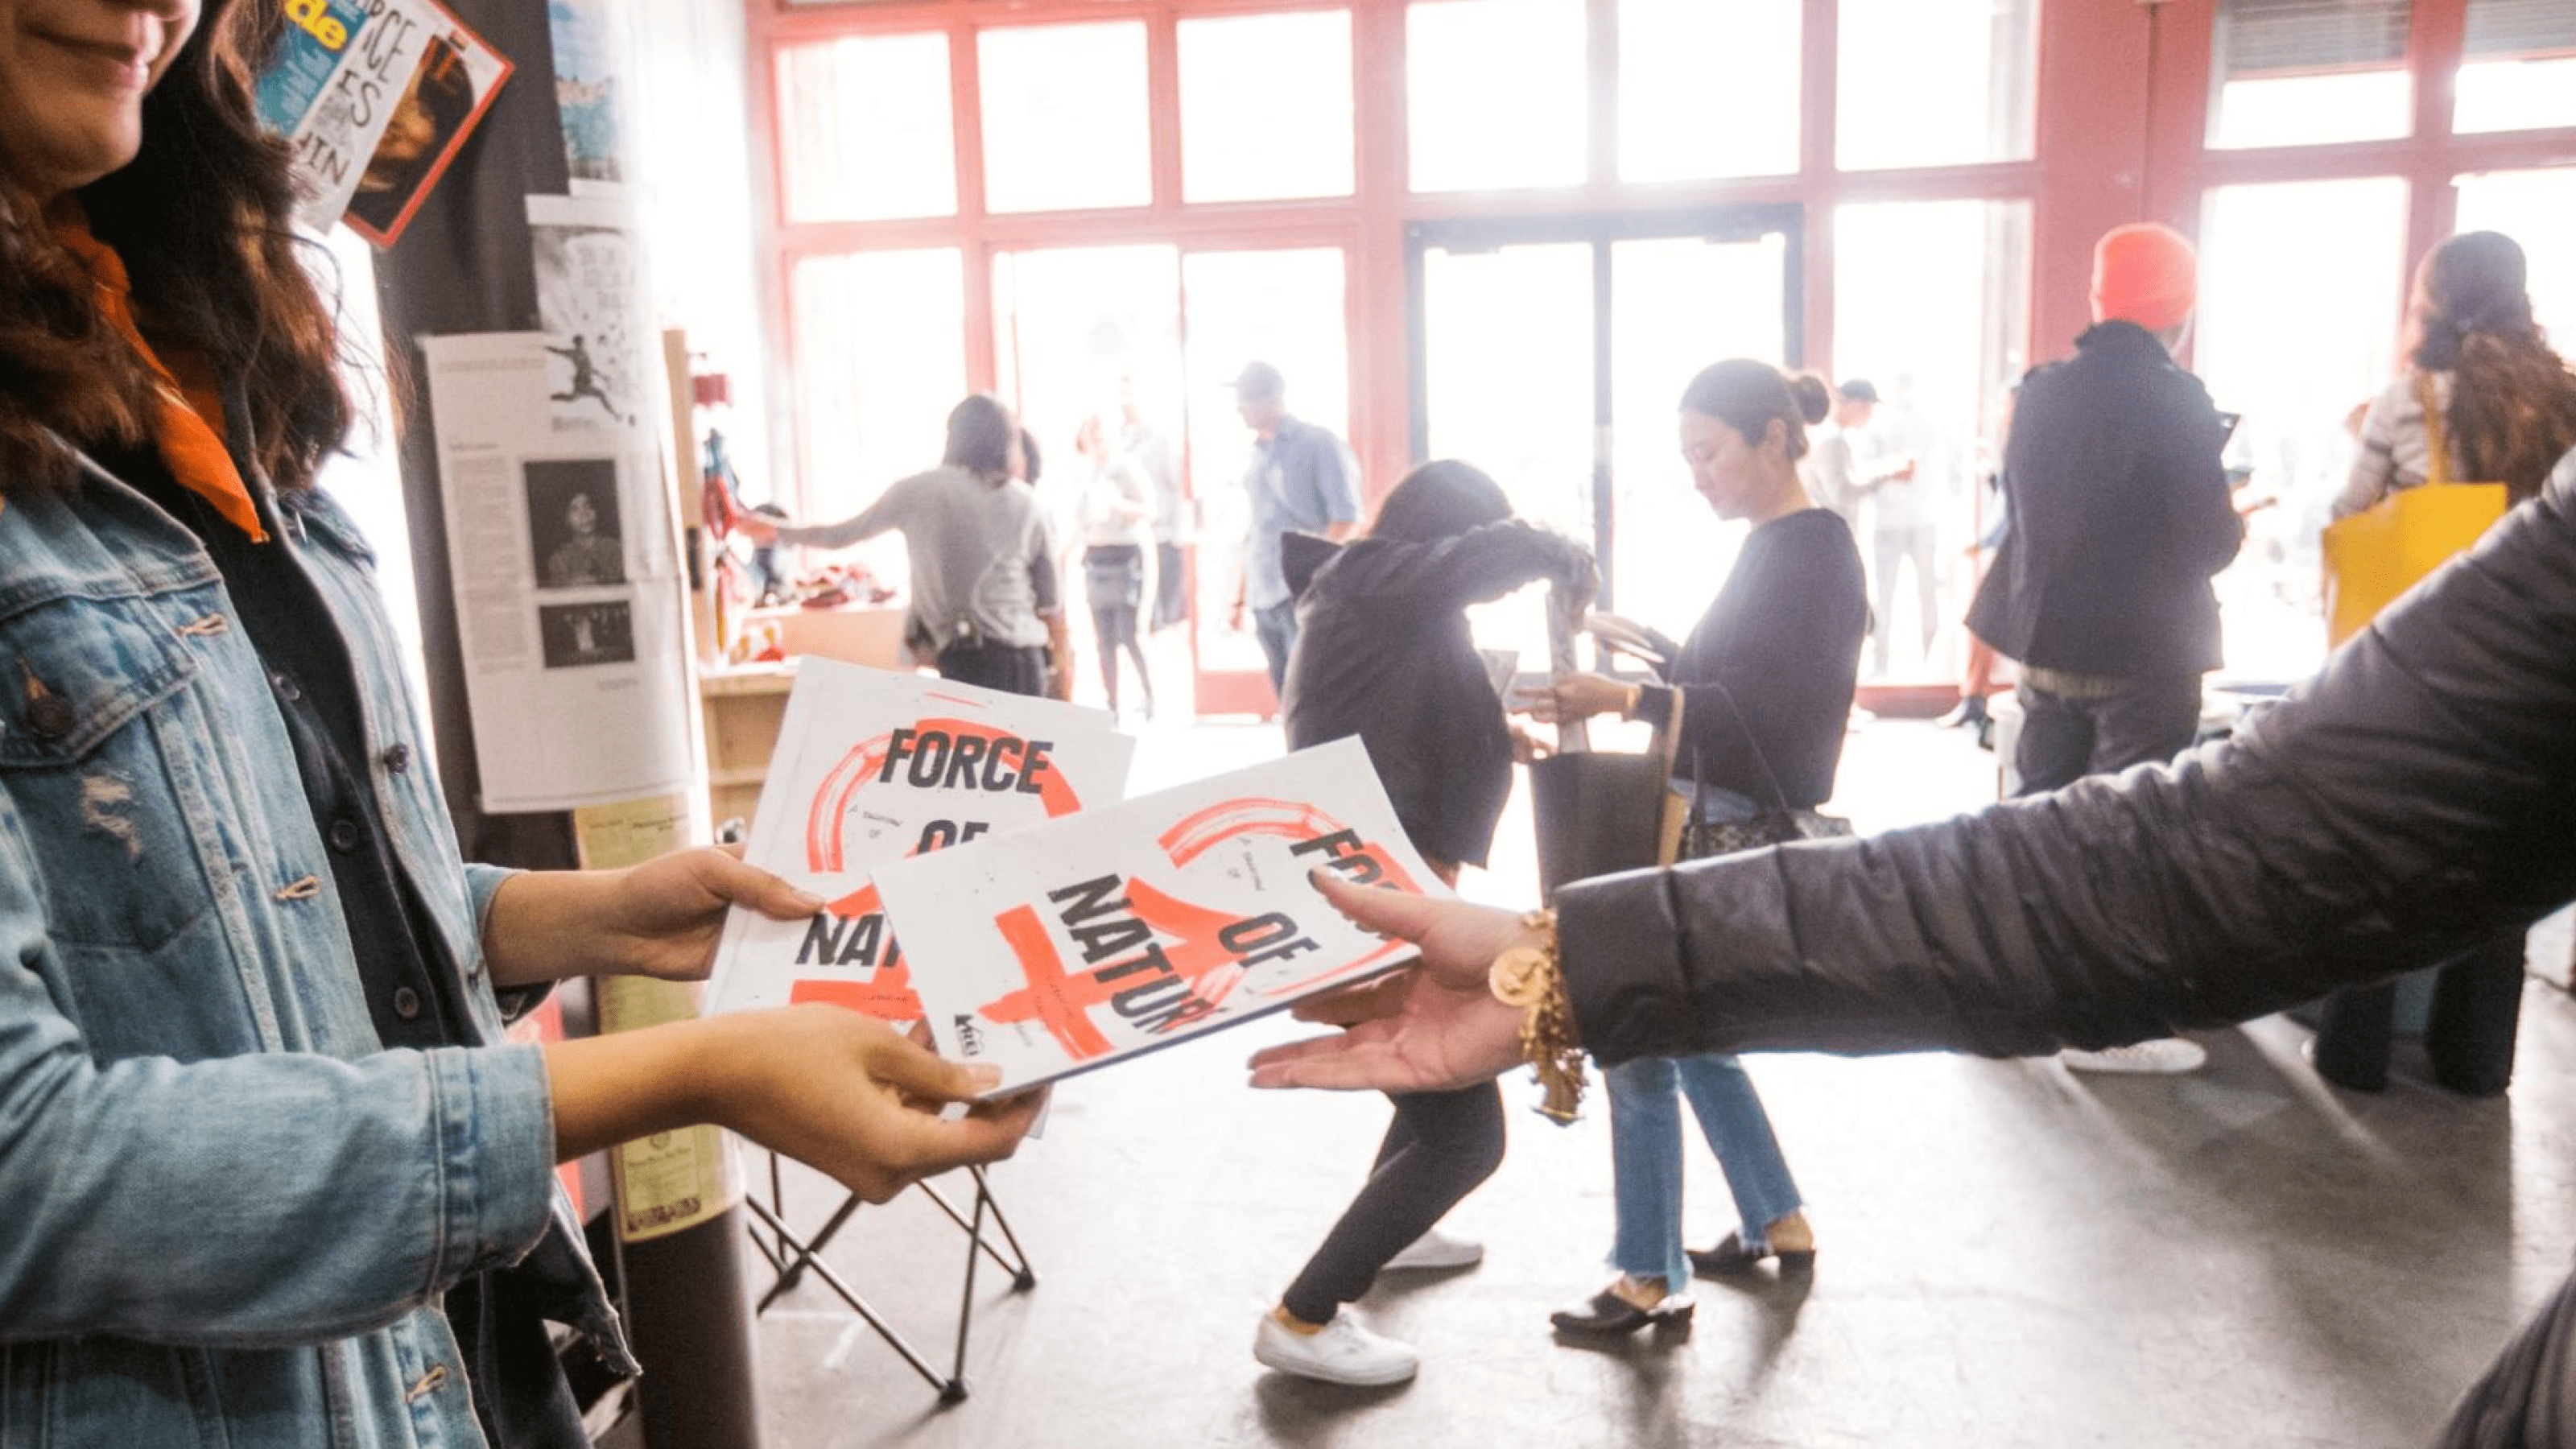 Person handing out flyers at a conference